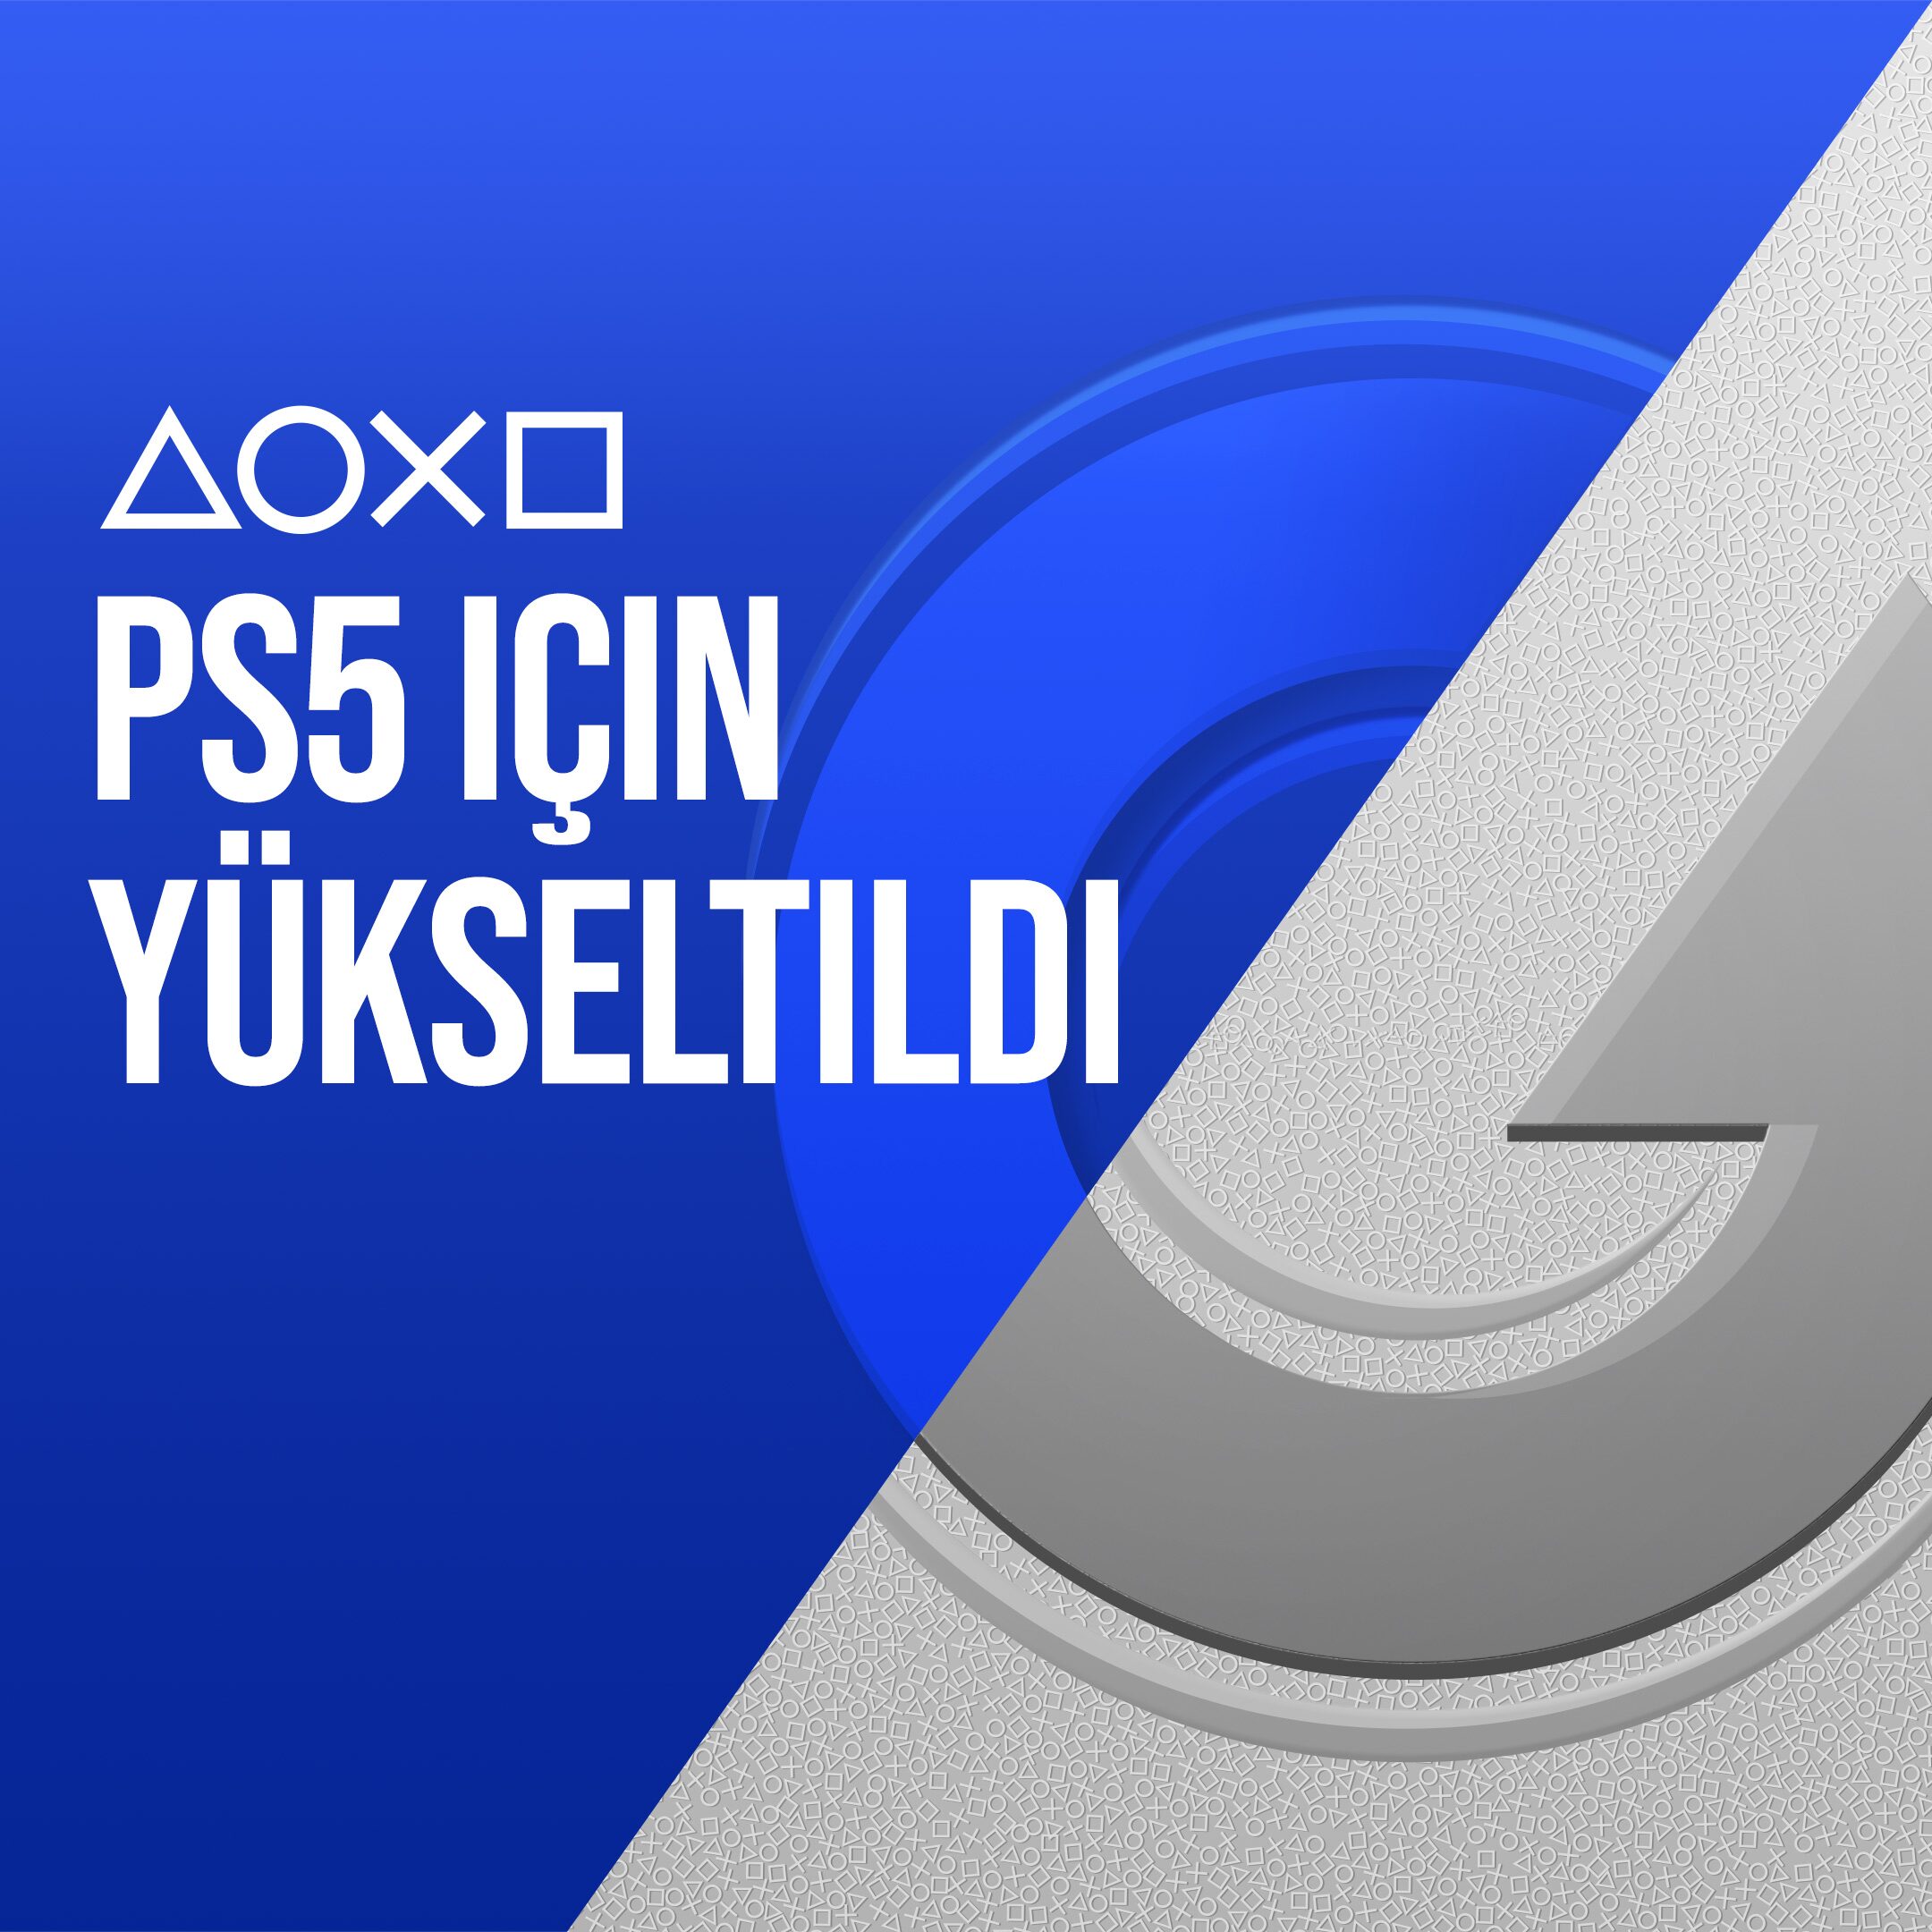 [EDITORIAL] Upgraded For PS5 S26 MS